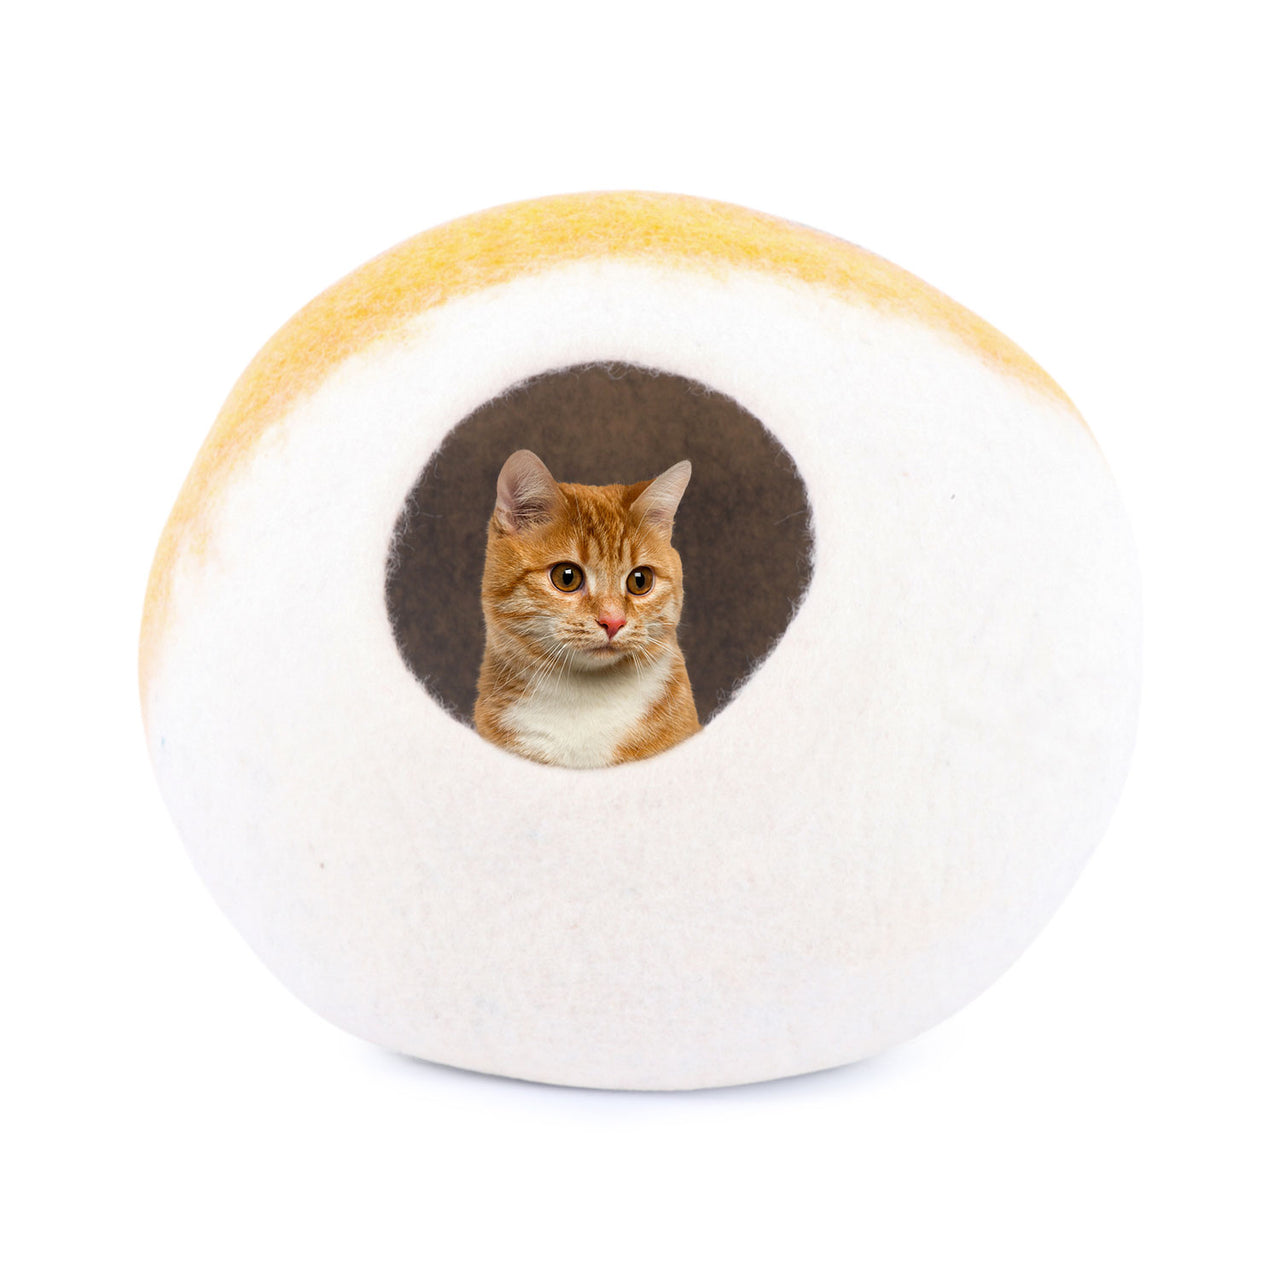 Felt and Wool Felt Cat cave Bed and House for Indoor Kittens Ecm 100% Natural Merino Wool Extremely Cozy and Warm.